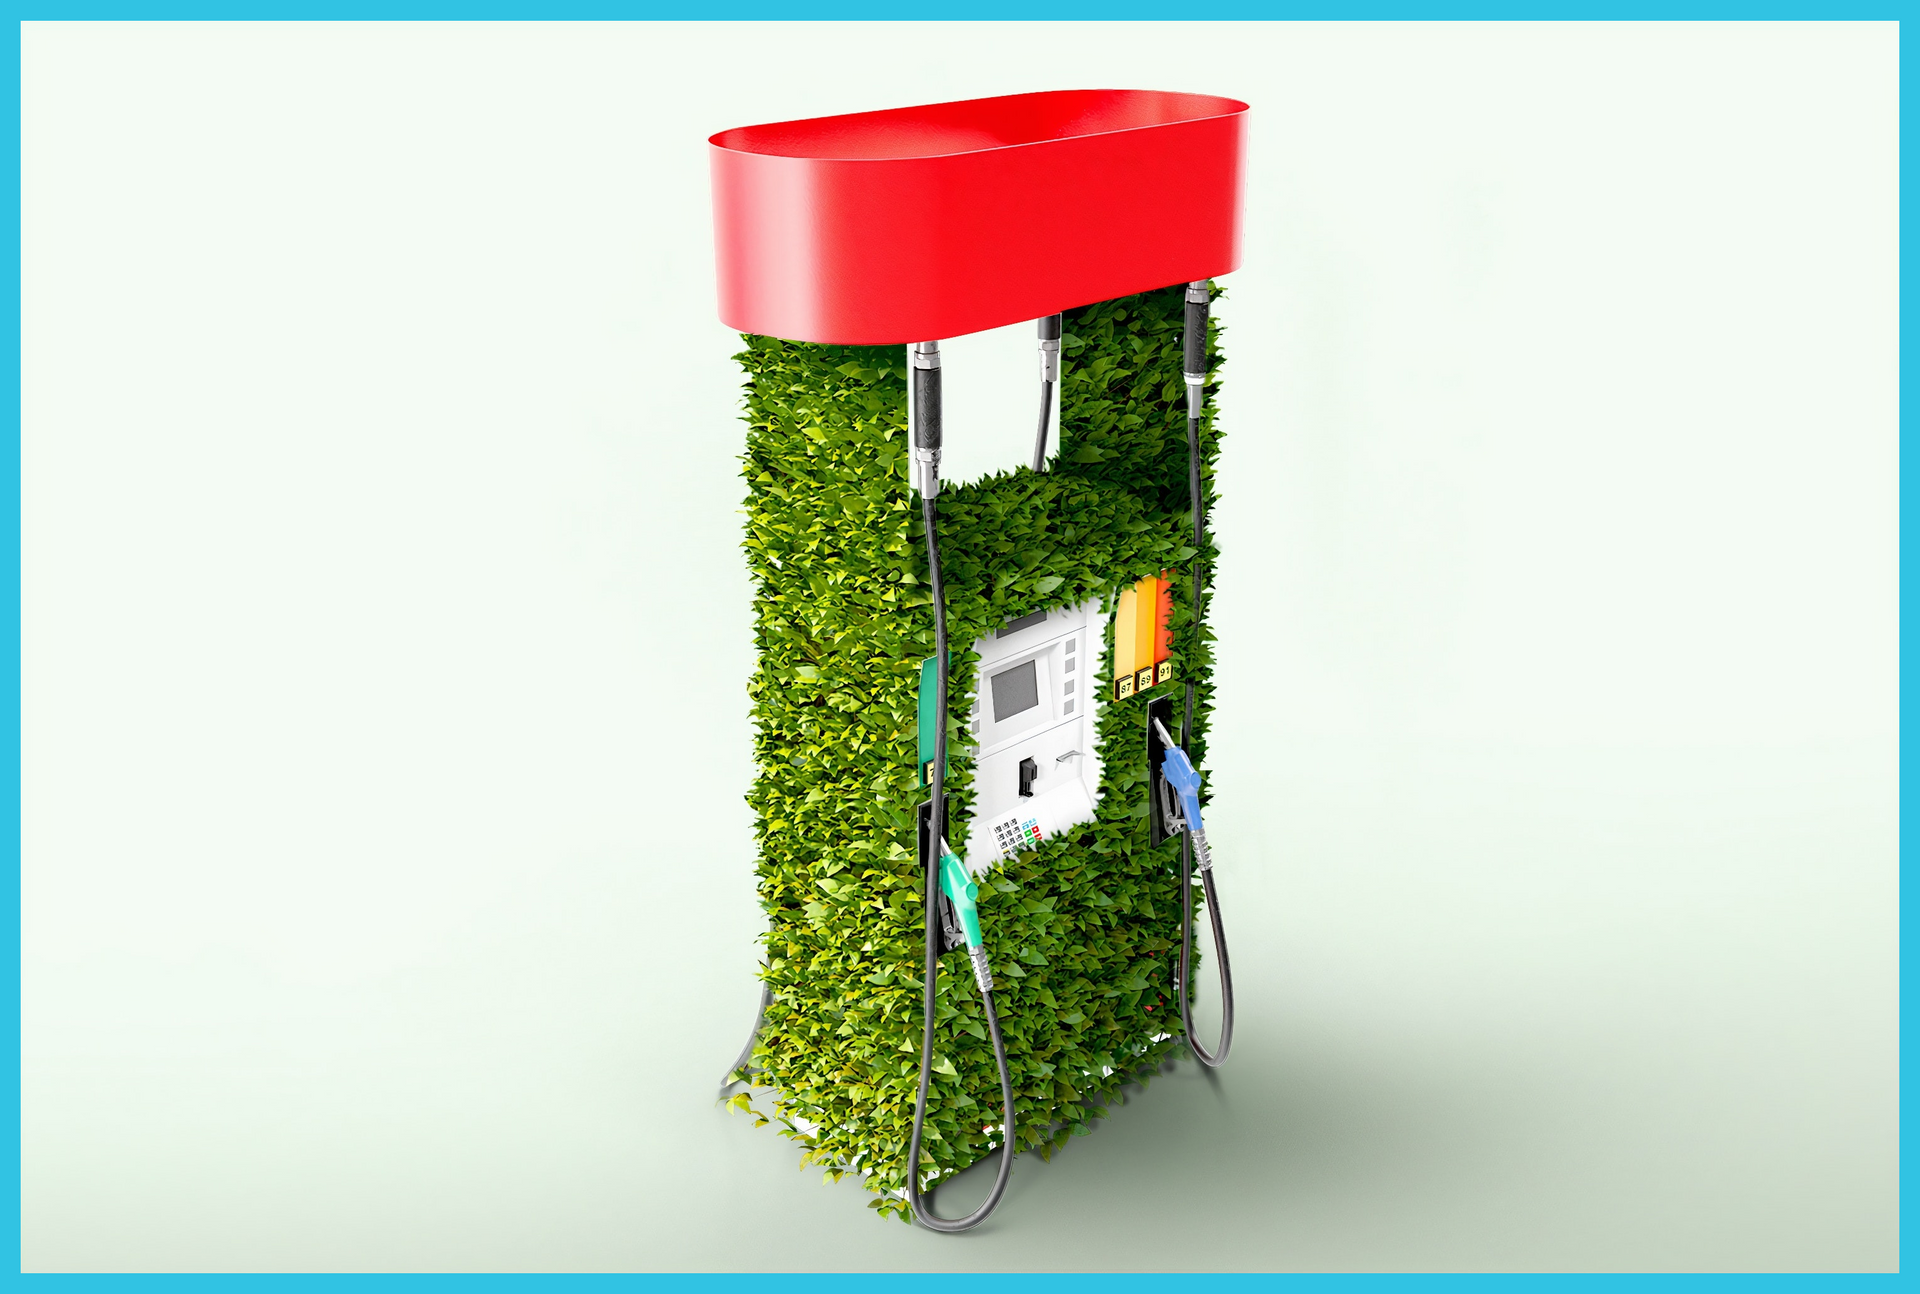 A gas pump is covered in green plants and has a red top.